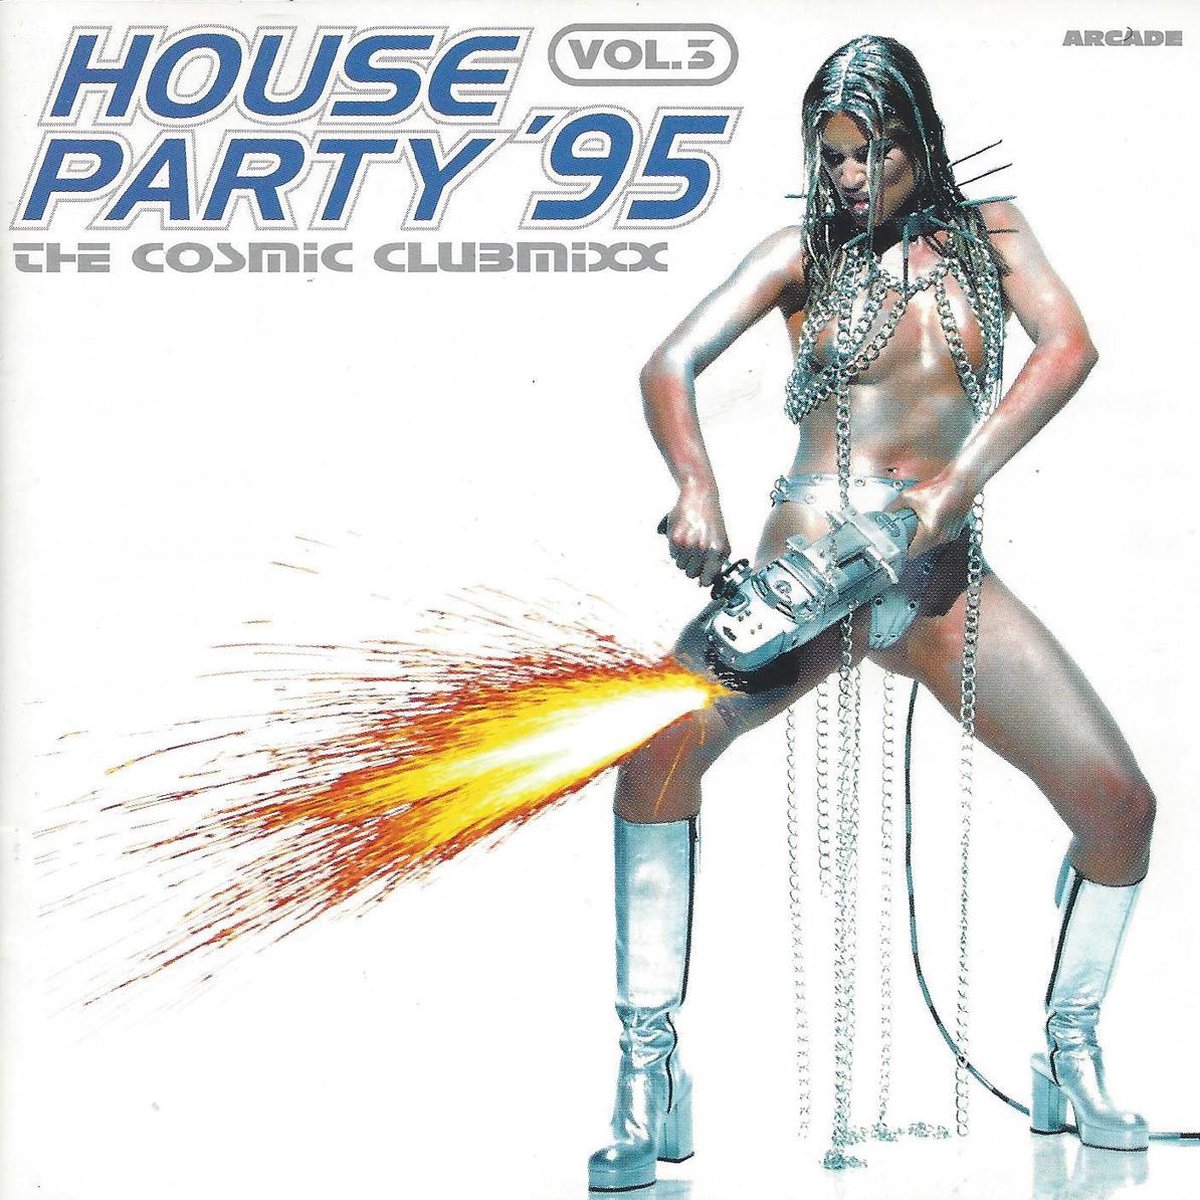 House Party '95 Volume 3 - The Cosmic Clubmix (1995) [Arcade]